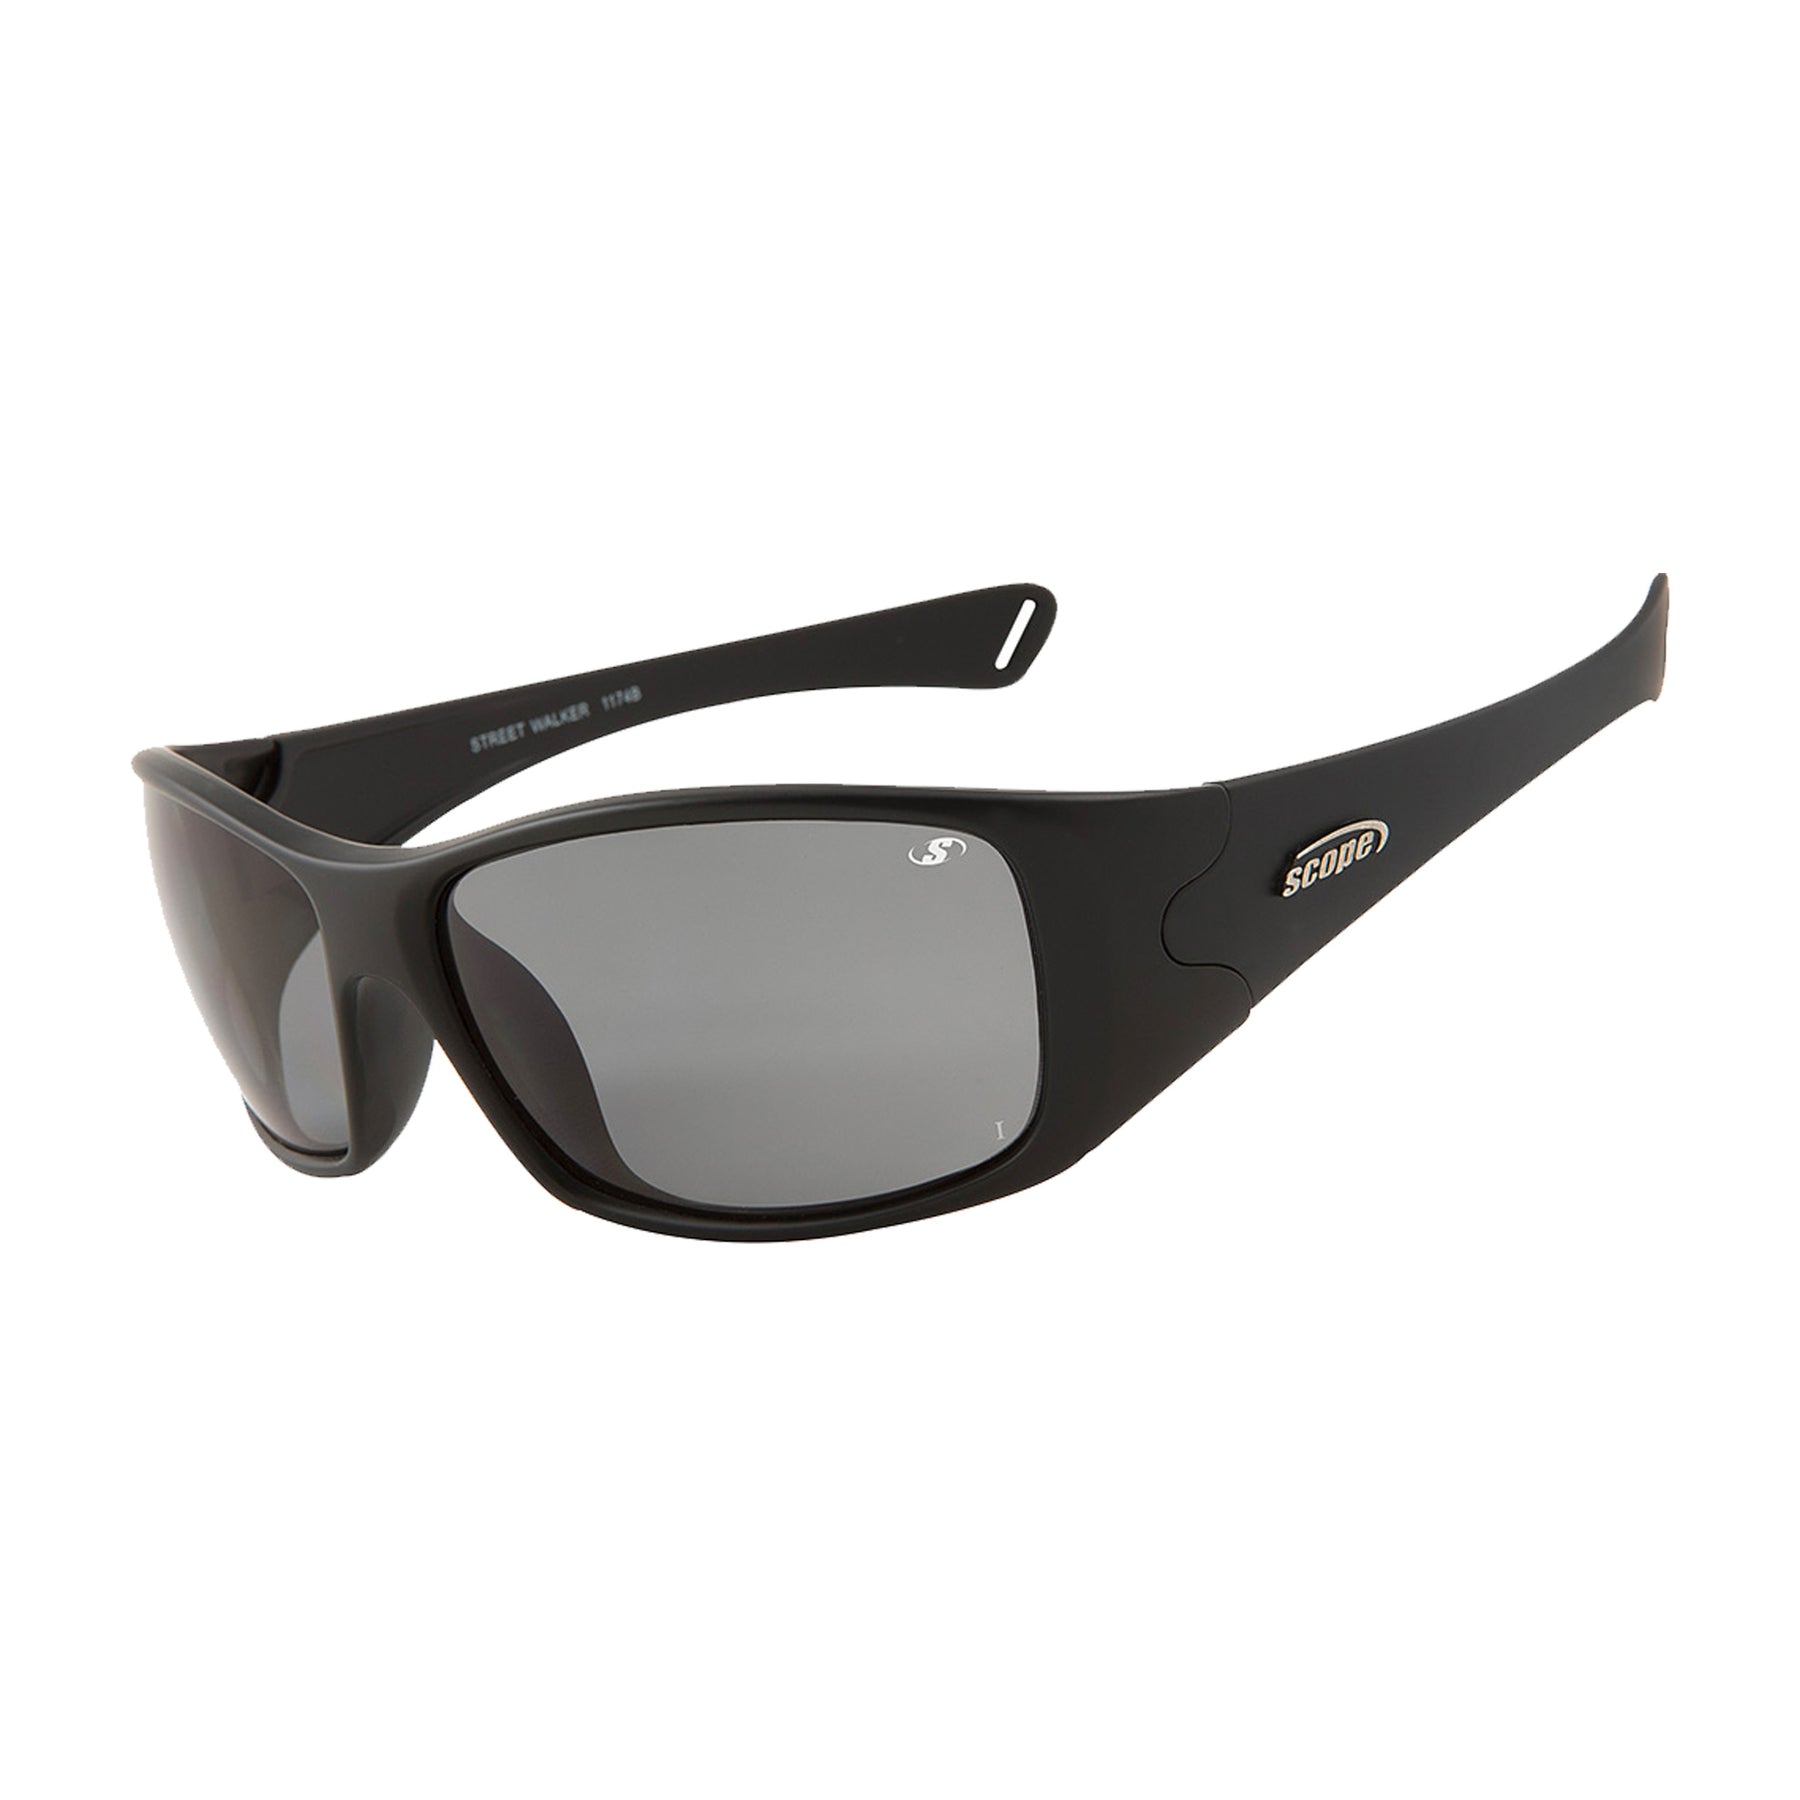 streetwalker safety glasses with smoke lens and soft touch black frame